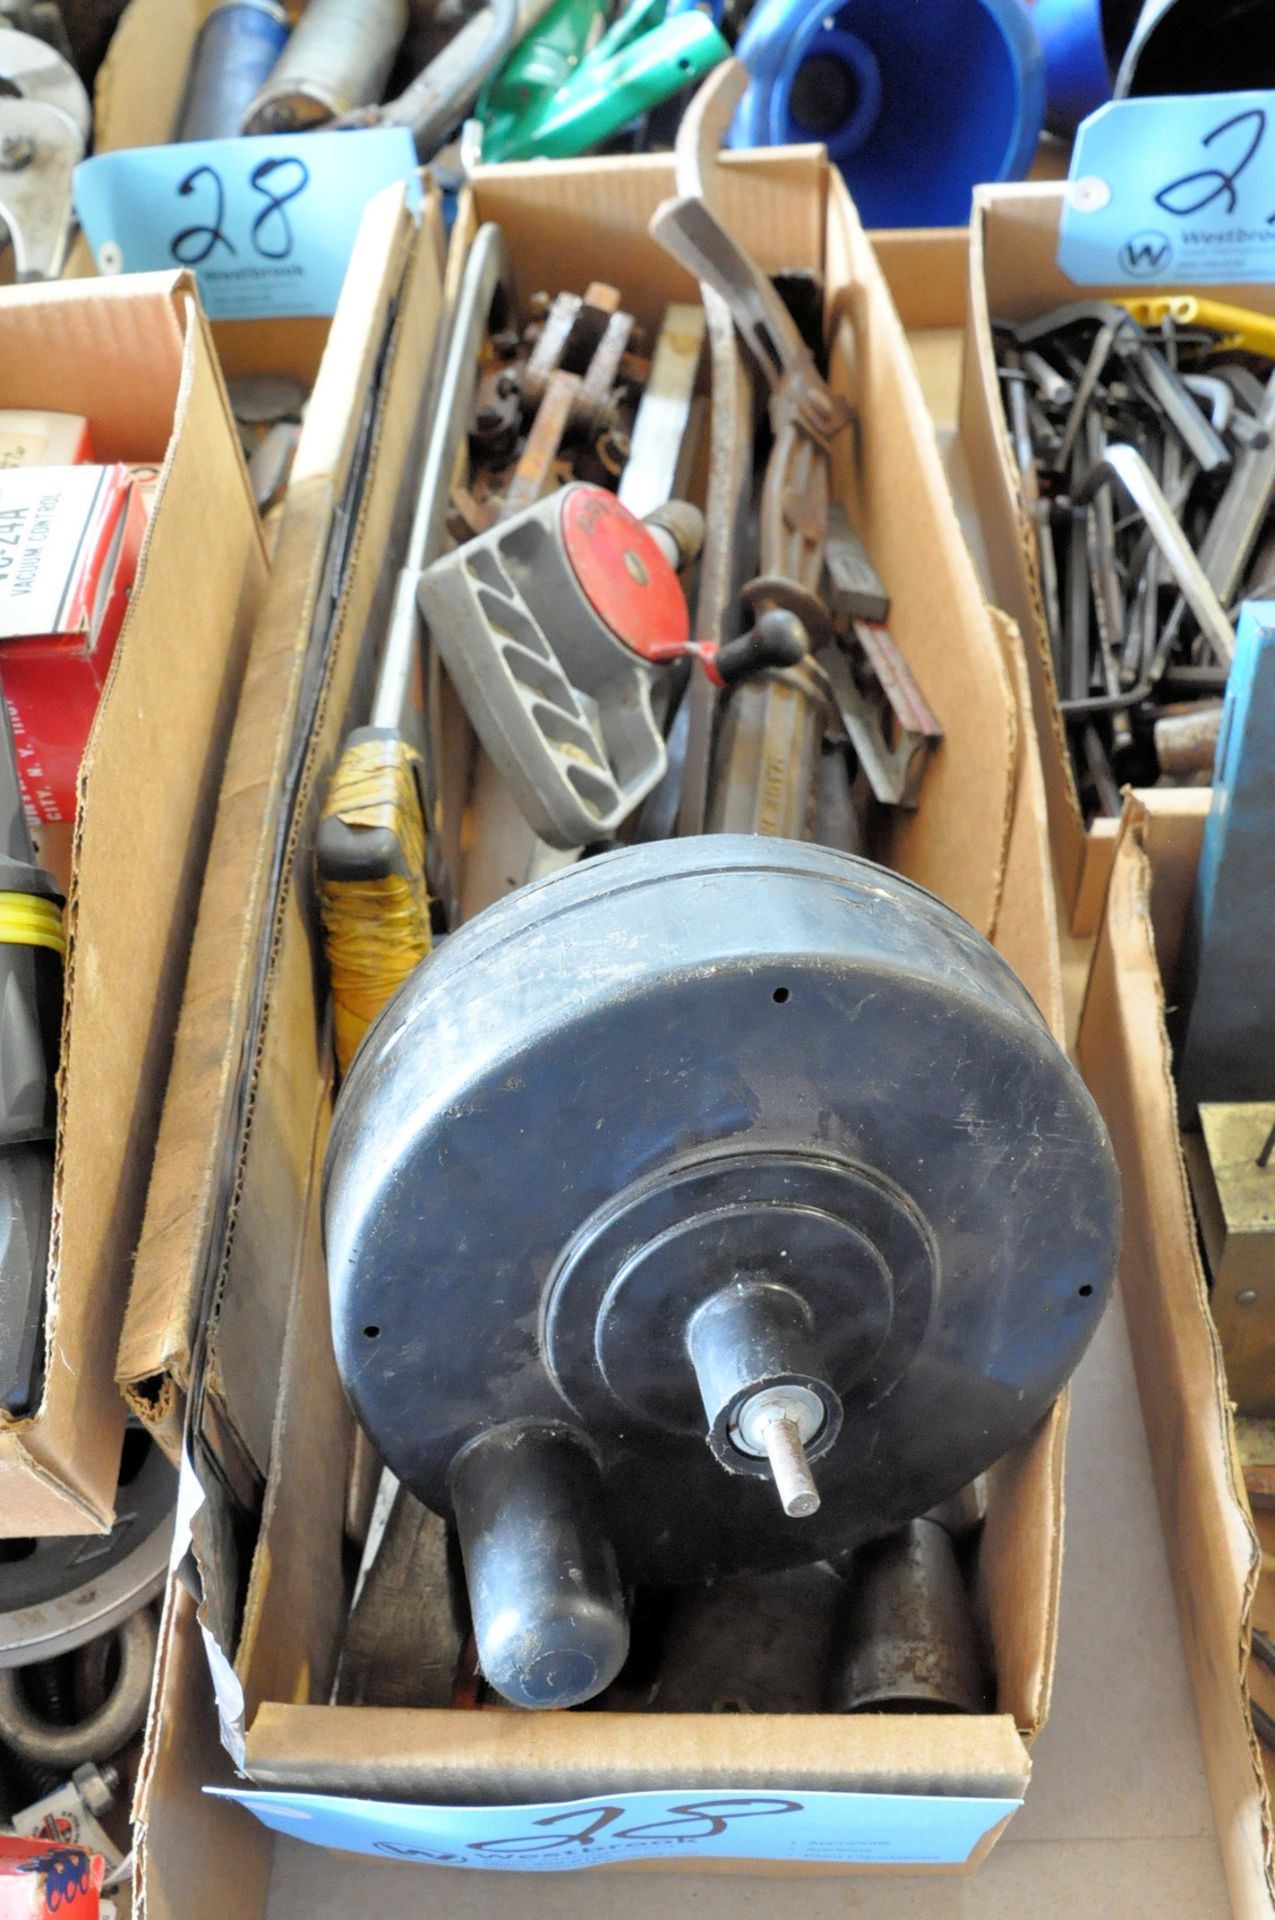 Lot-Screwdrivers, Pliers, Brushes, Grease Guns, Funnels, Tape Guns, Etc. in (12) Boxes - Image 5 of 6